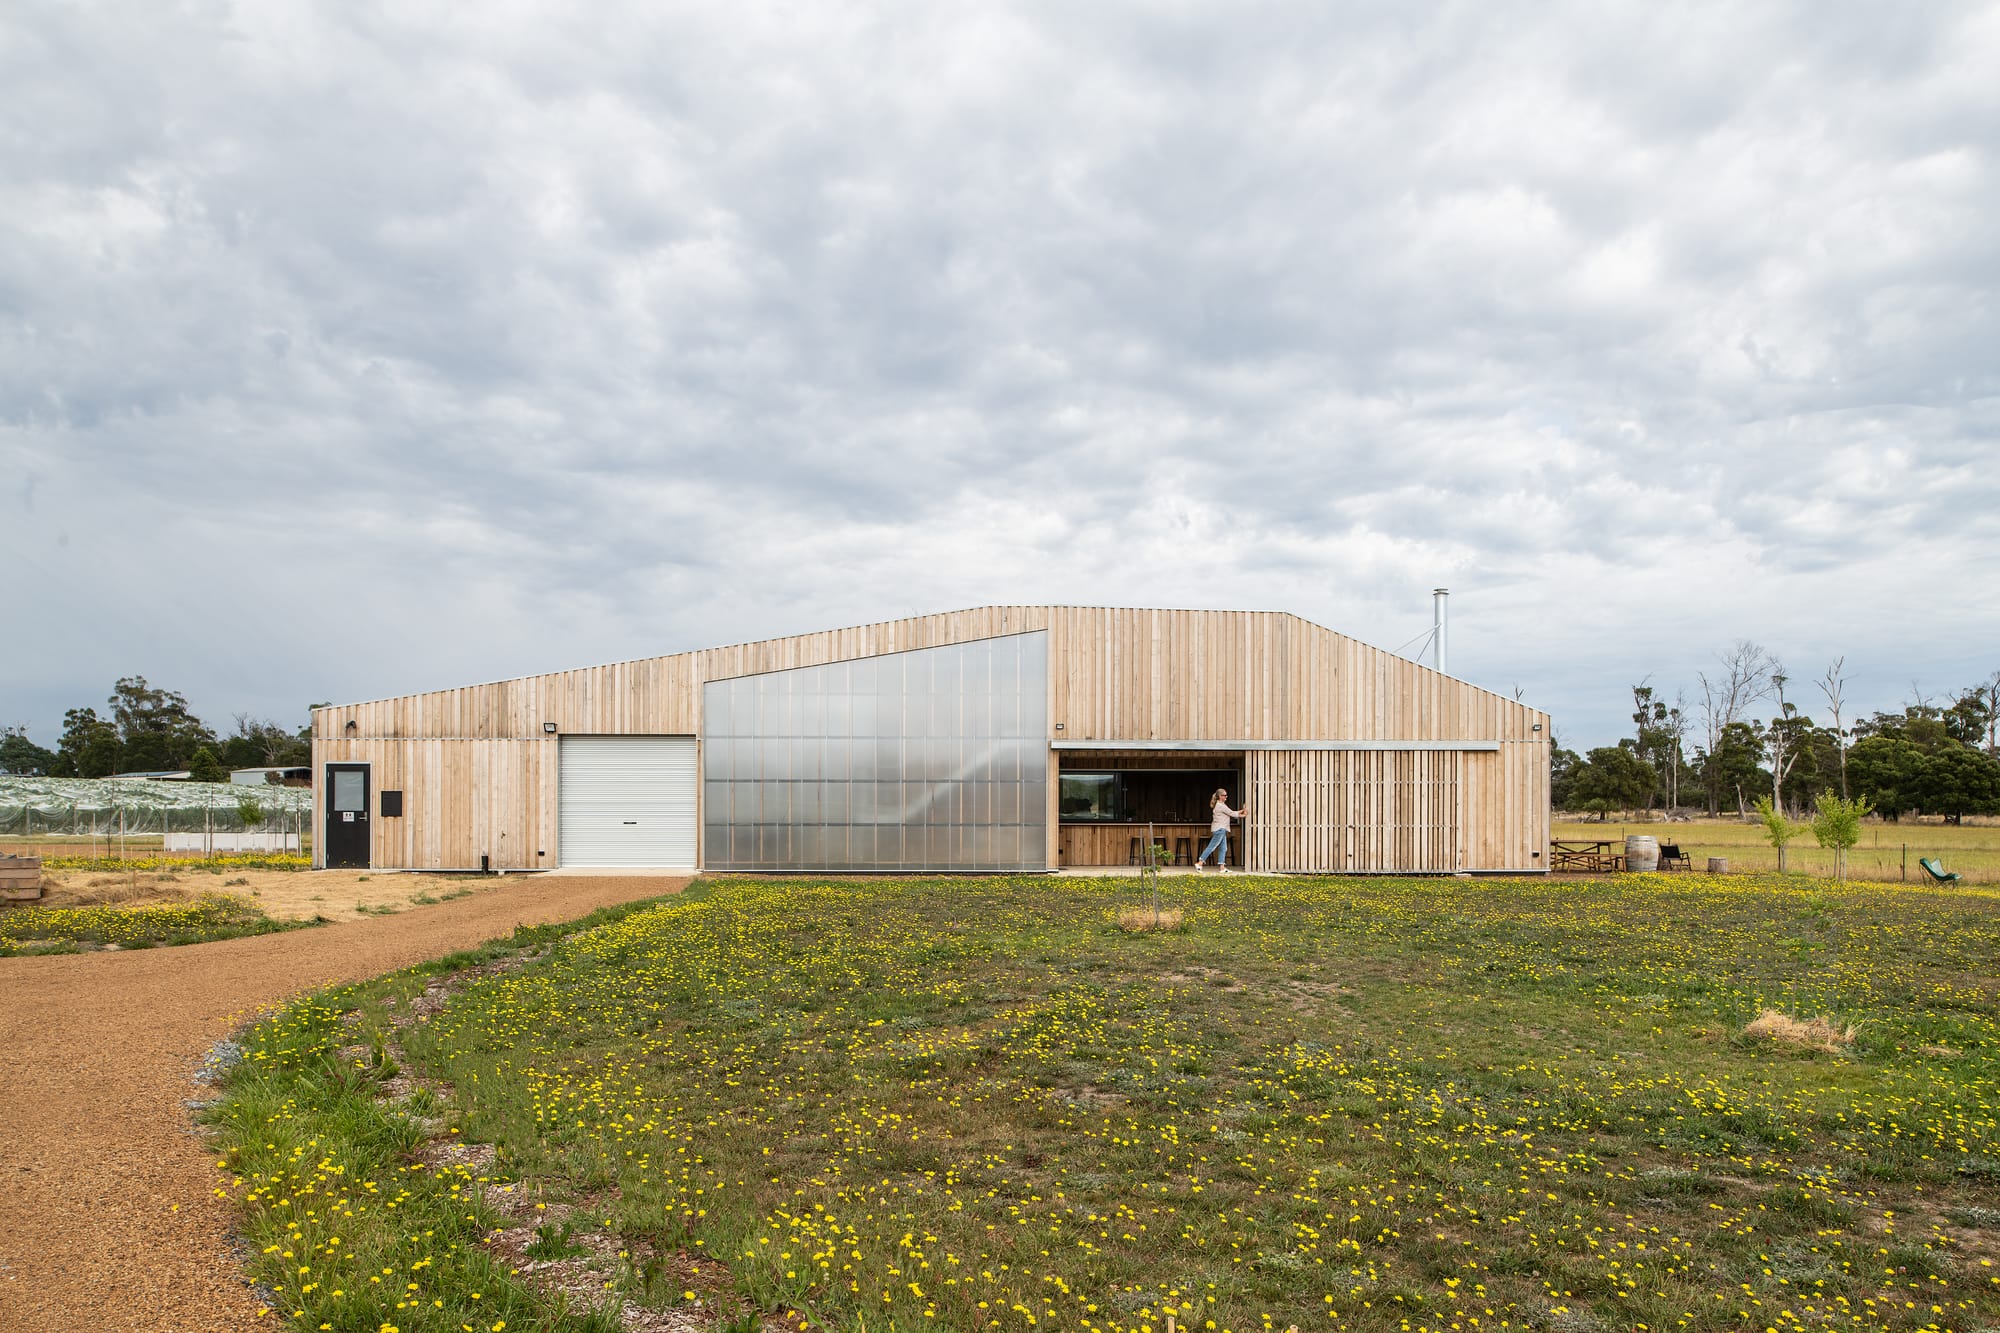 Tasmanian Timber Series: Westella Vineyard.Frontal view of the winery's modern design with curved roof architecture, large sliding doors, and a welcoming open space leading into the tasting room, surrounded by a natural landscape dotted with wildflowers.